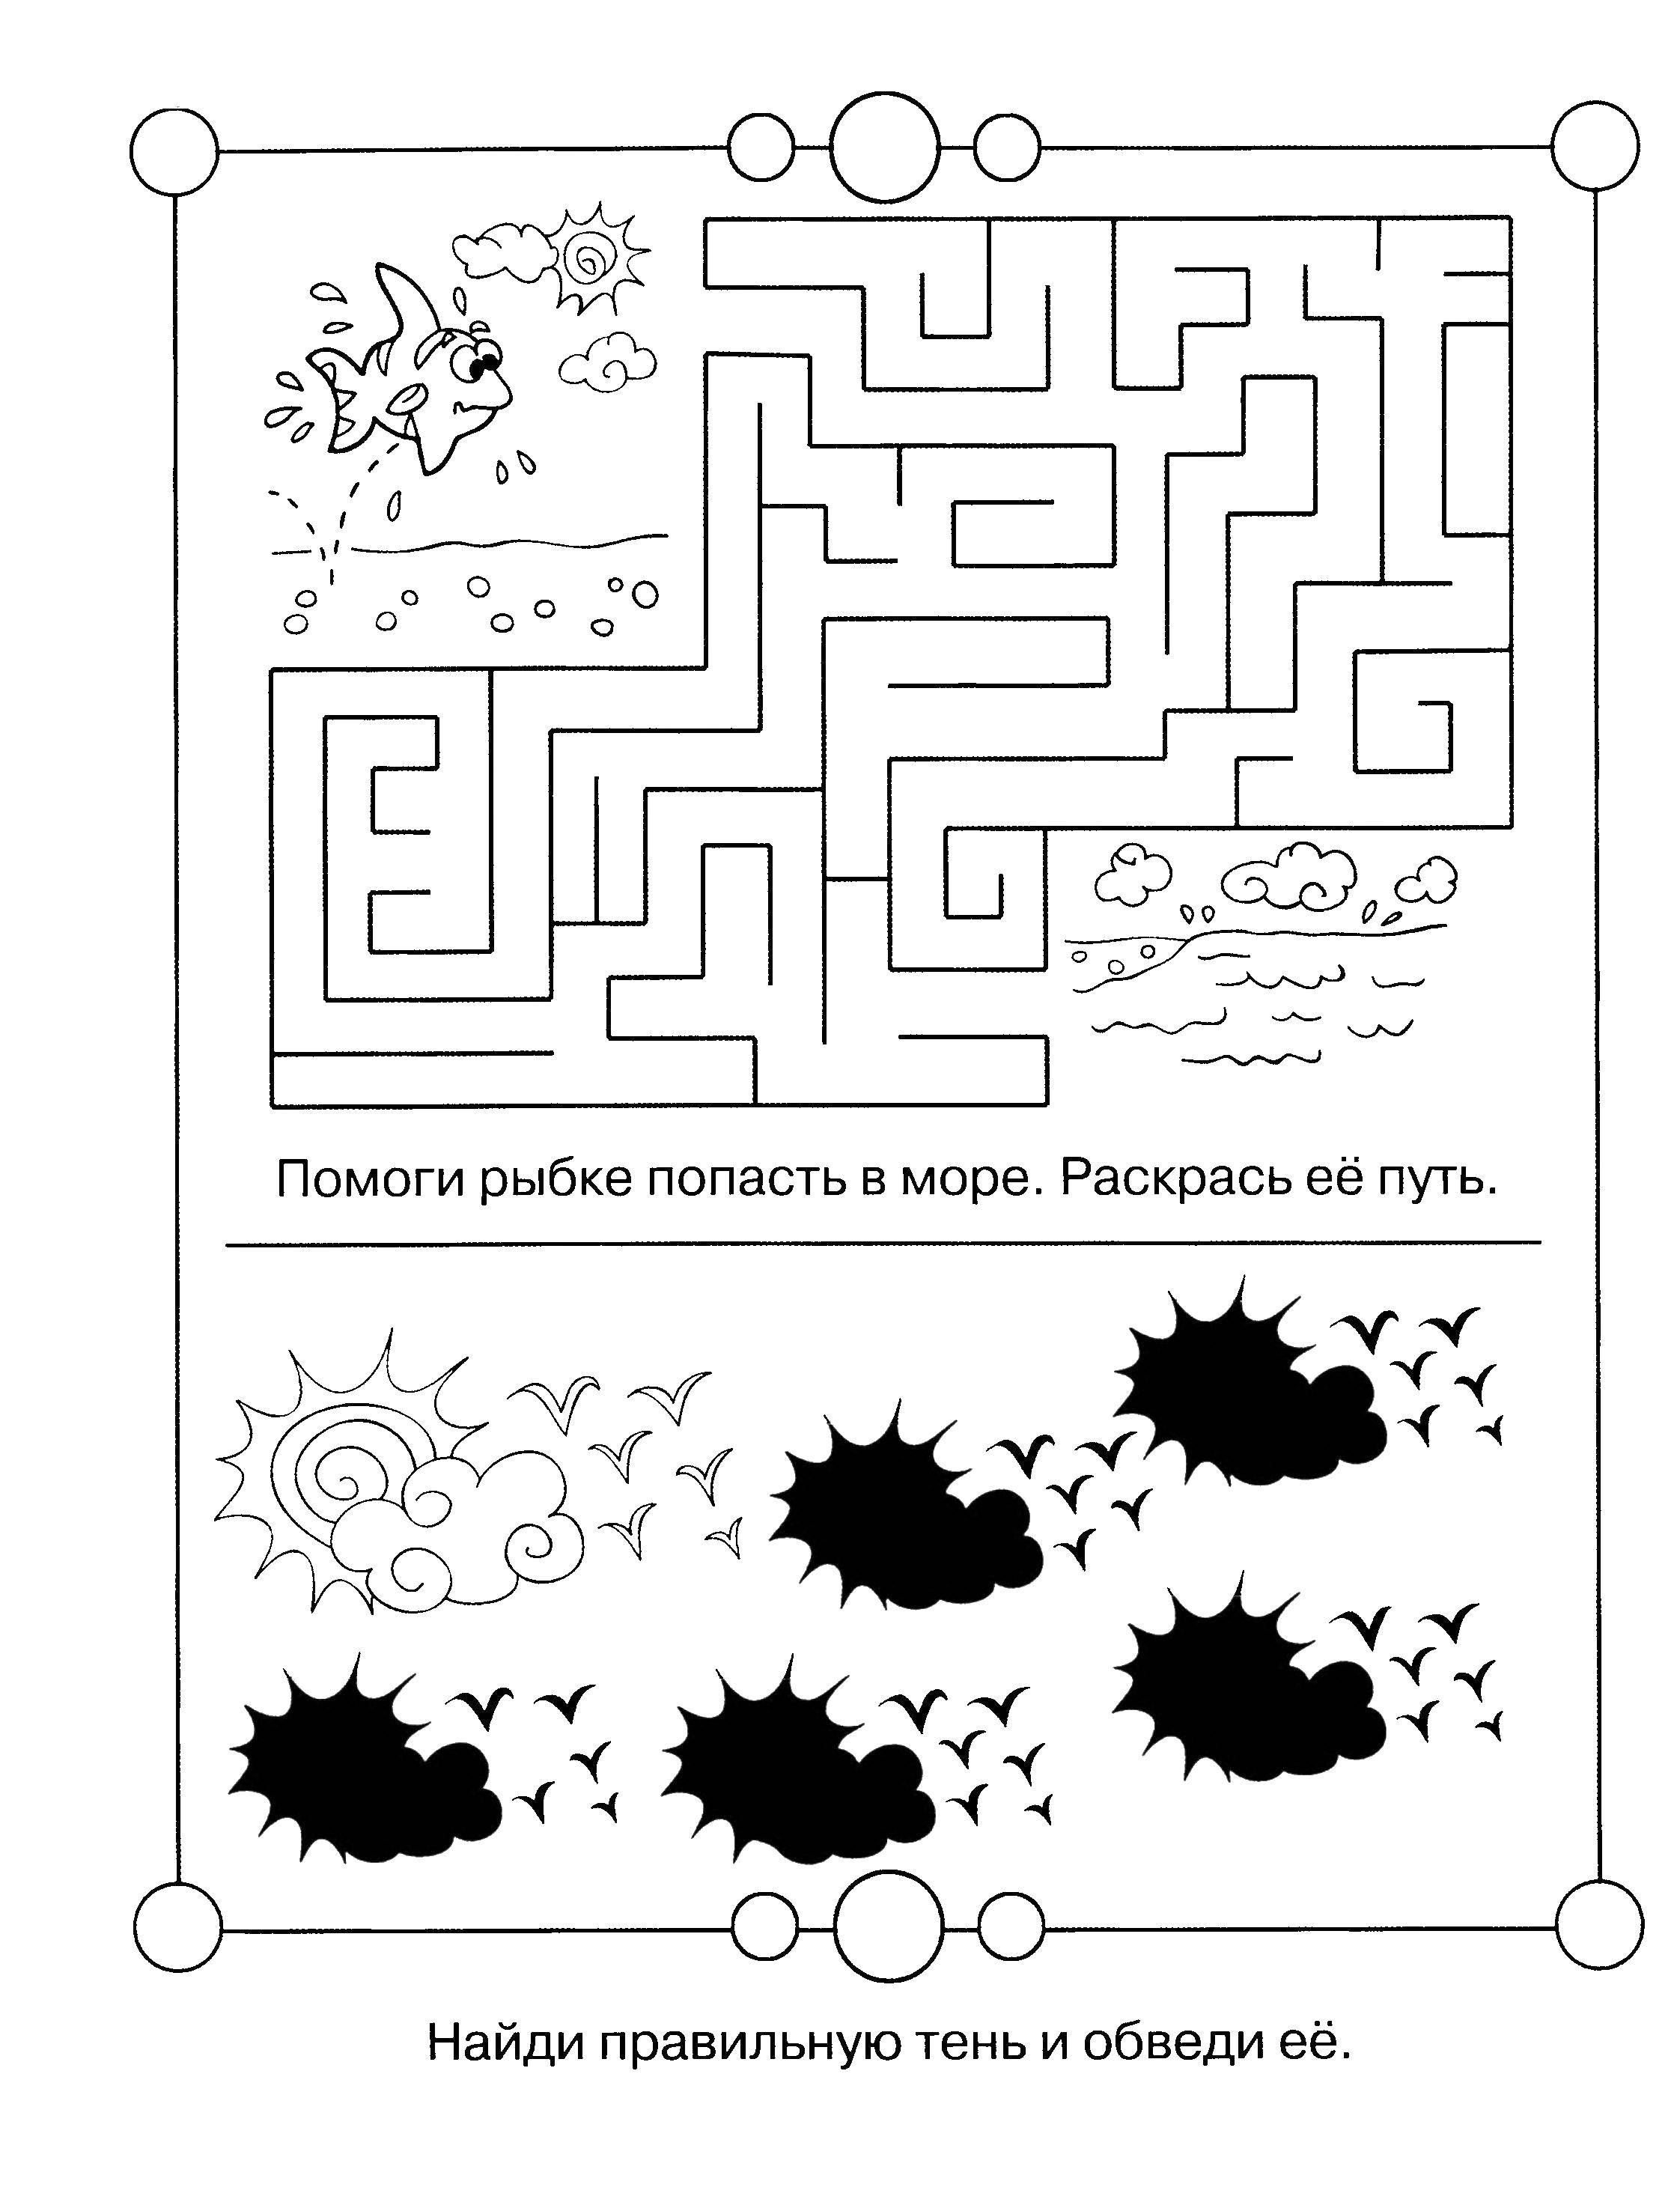 Coloring Help the fish get into the sea. Category riddles for kids. Tags:  Teaching coloring, logic.